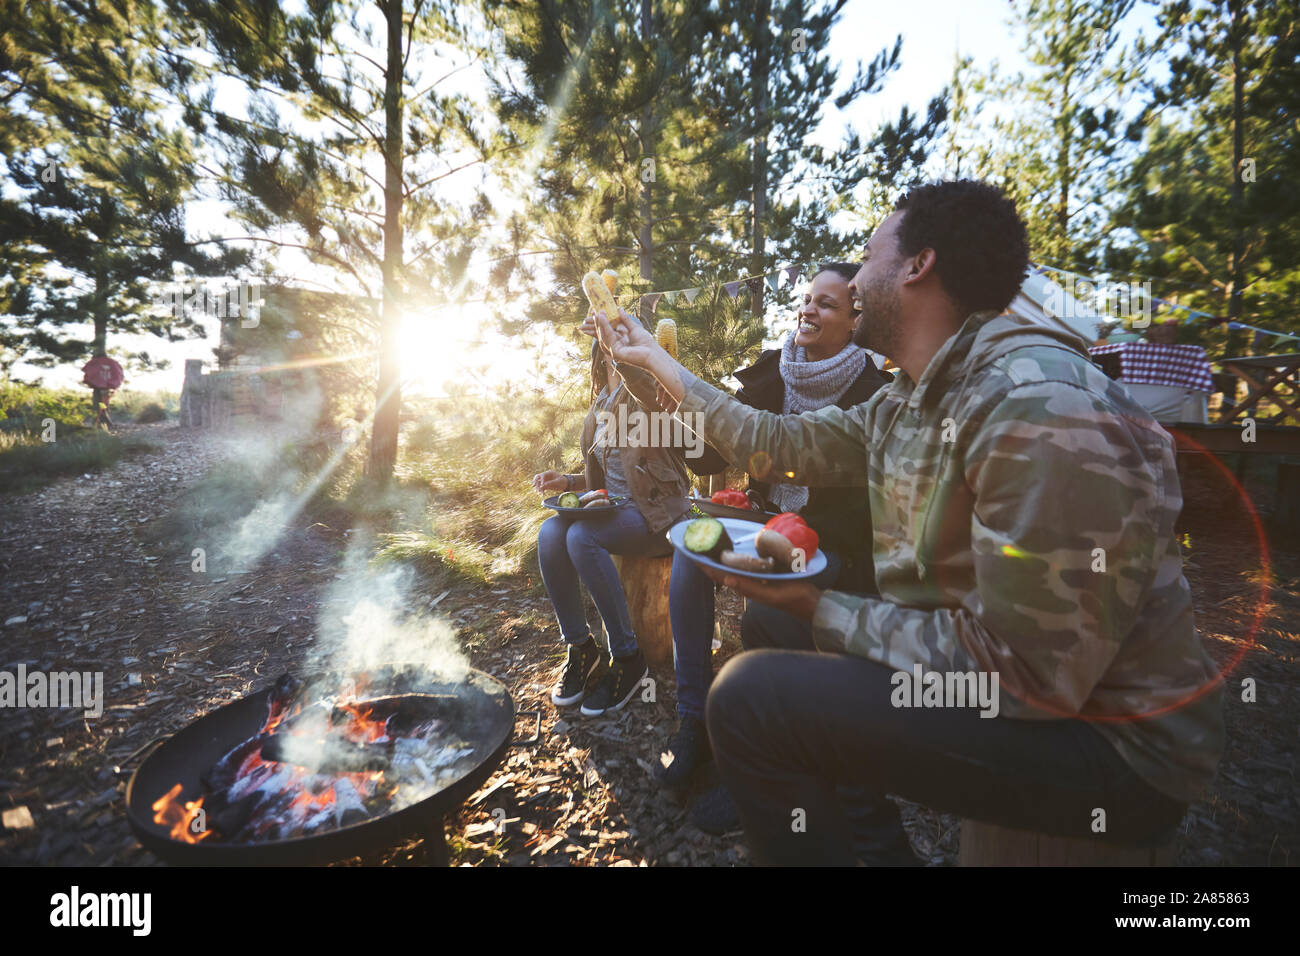 Happy friends eating at sunny campsite in woods Stock Photo